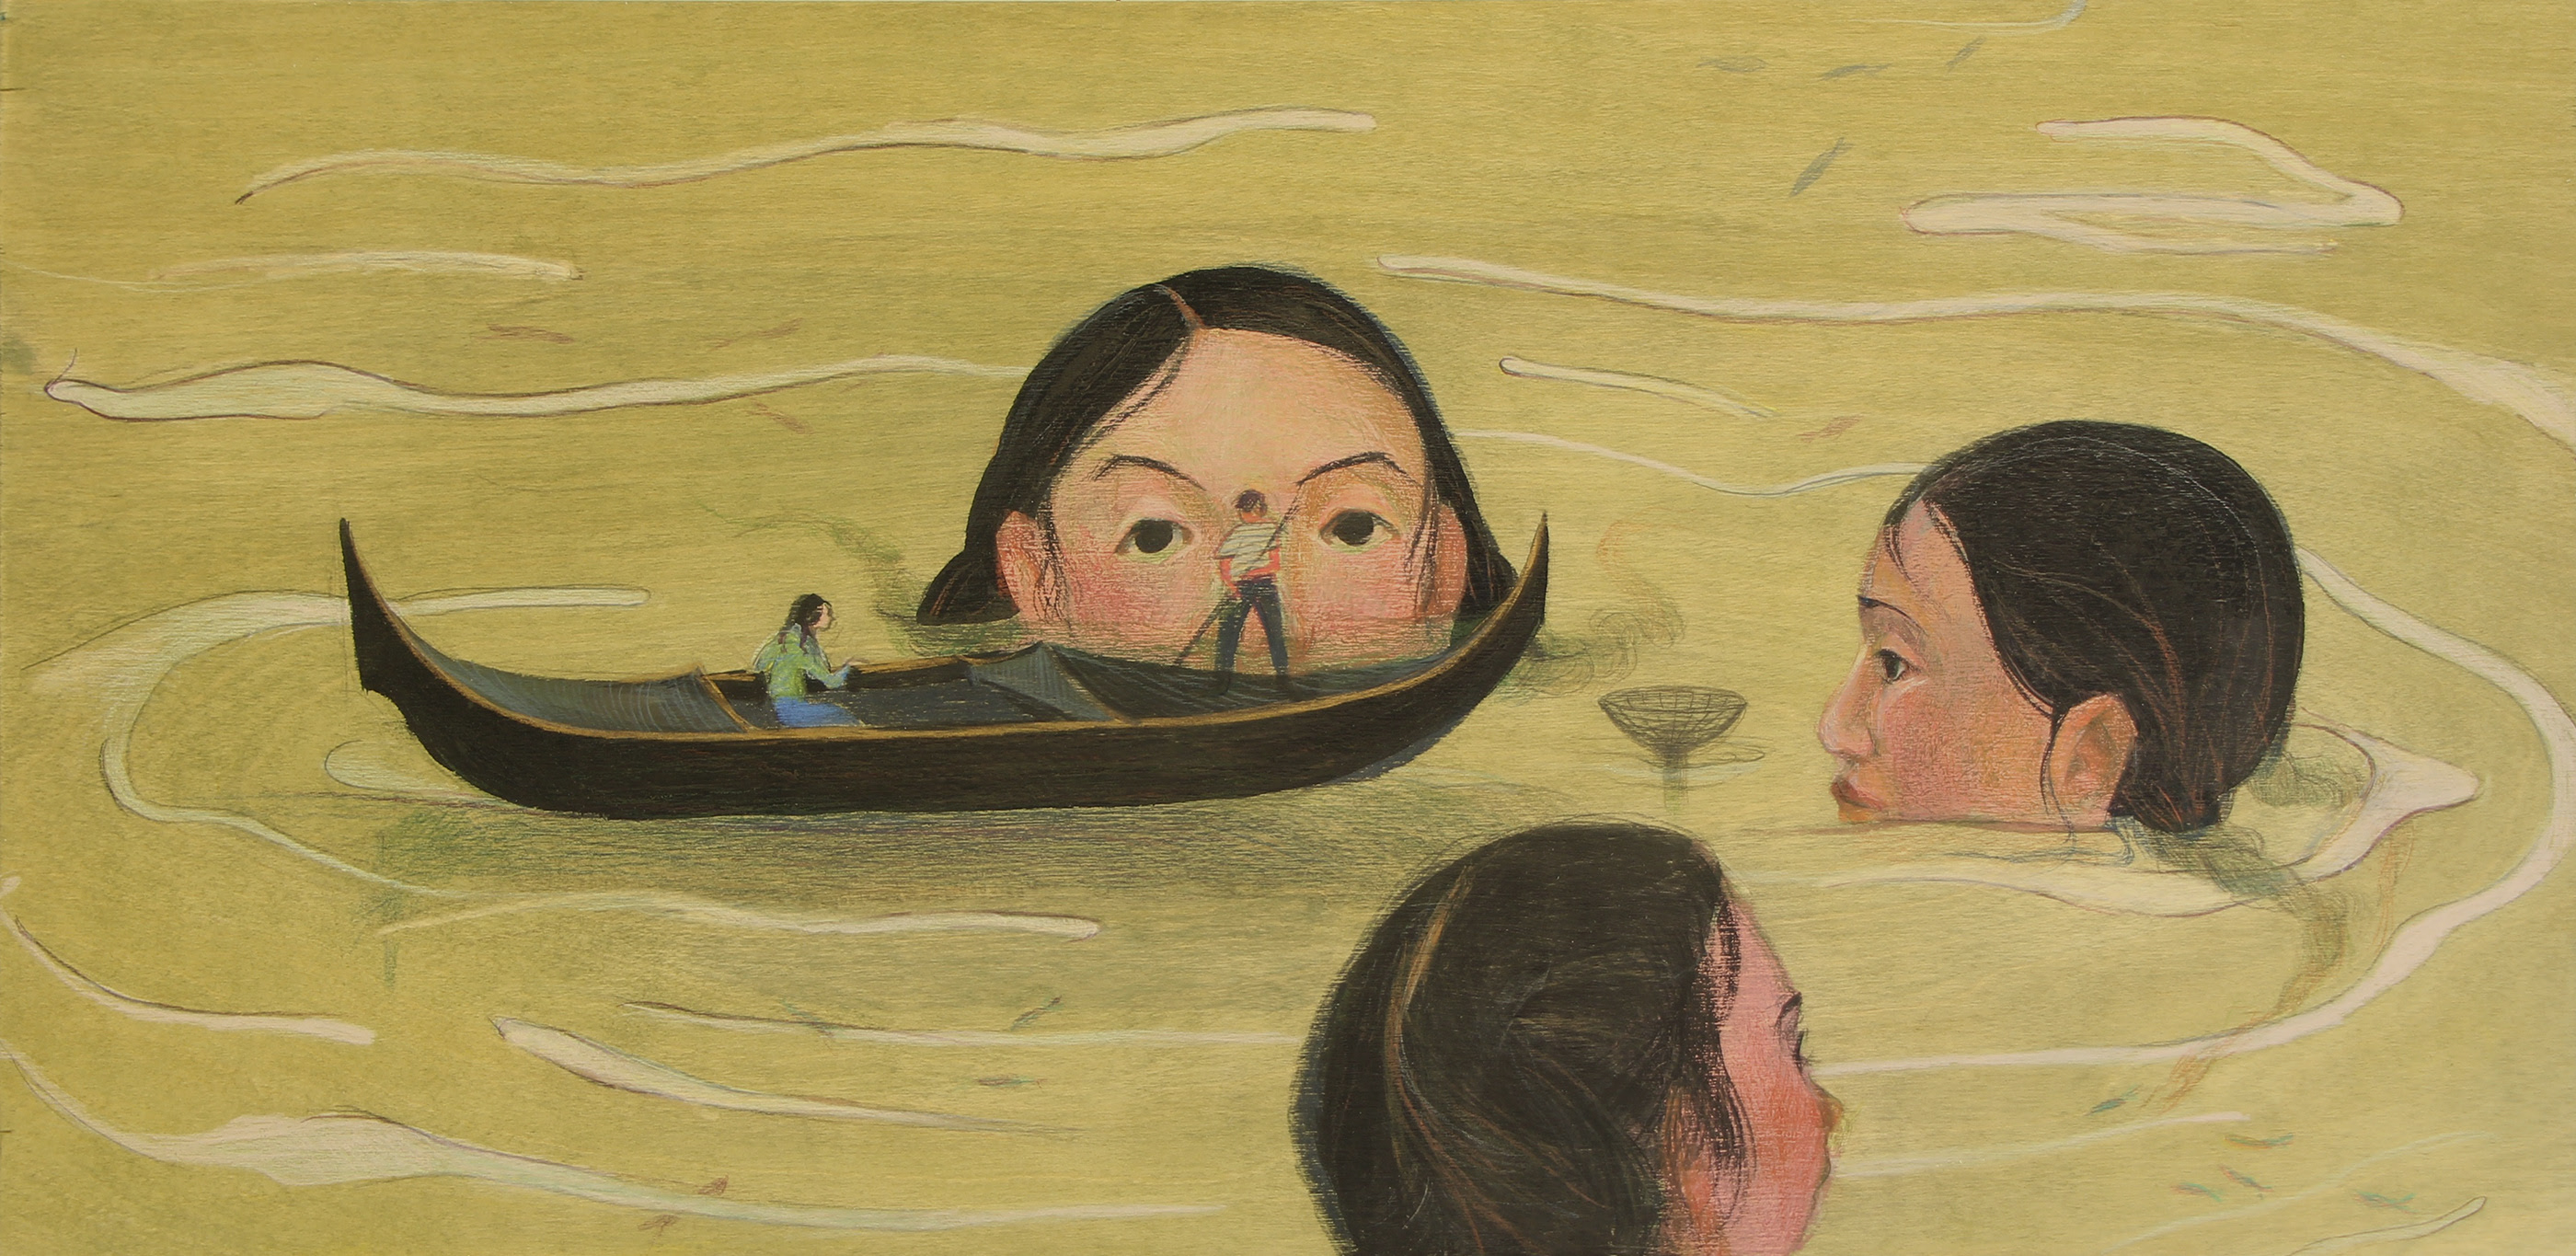 soft crayon illustration titled Waterside by Ellen He where two figures row in a body of water where three giant women stand with just their heads above water